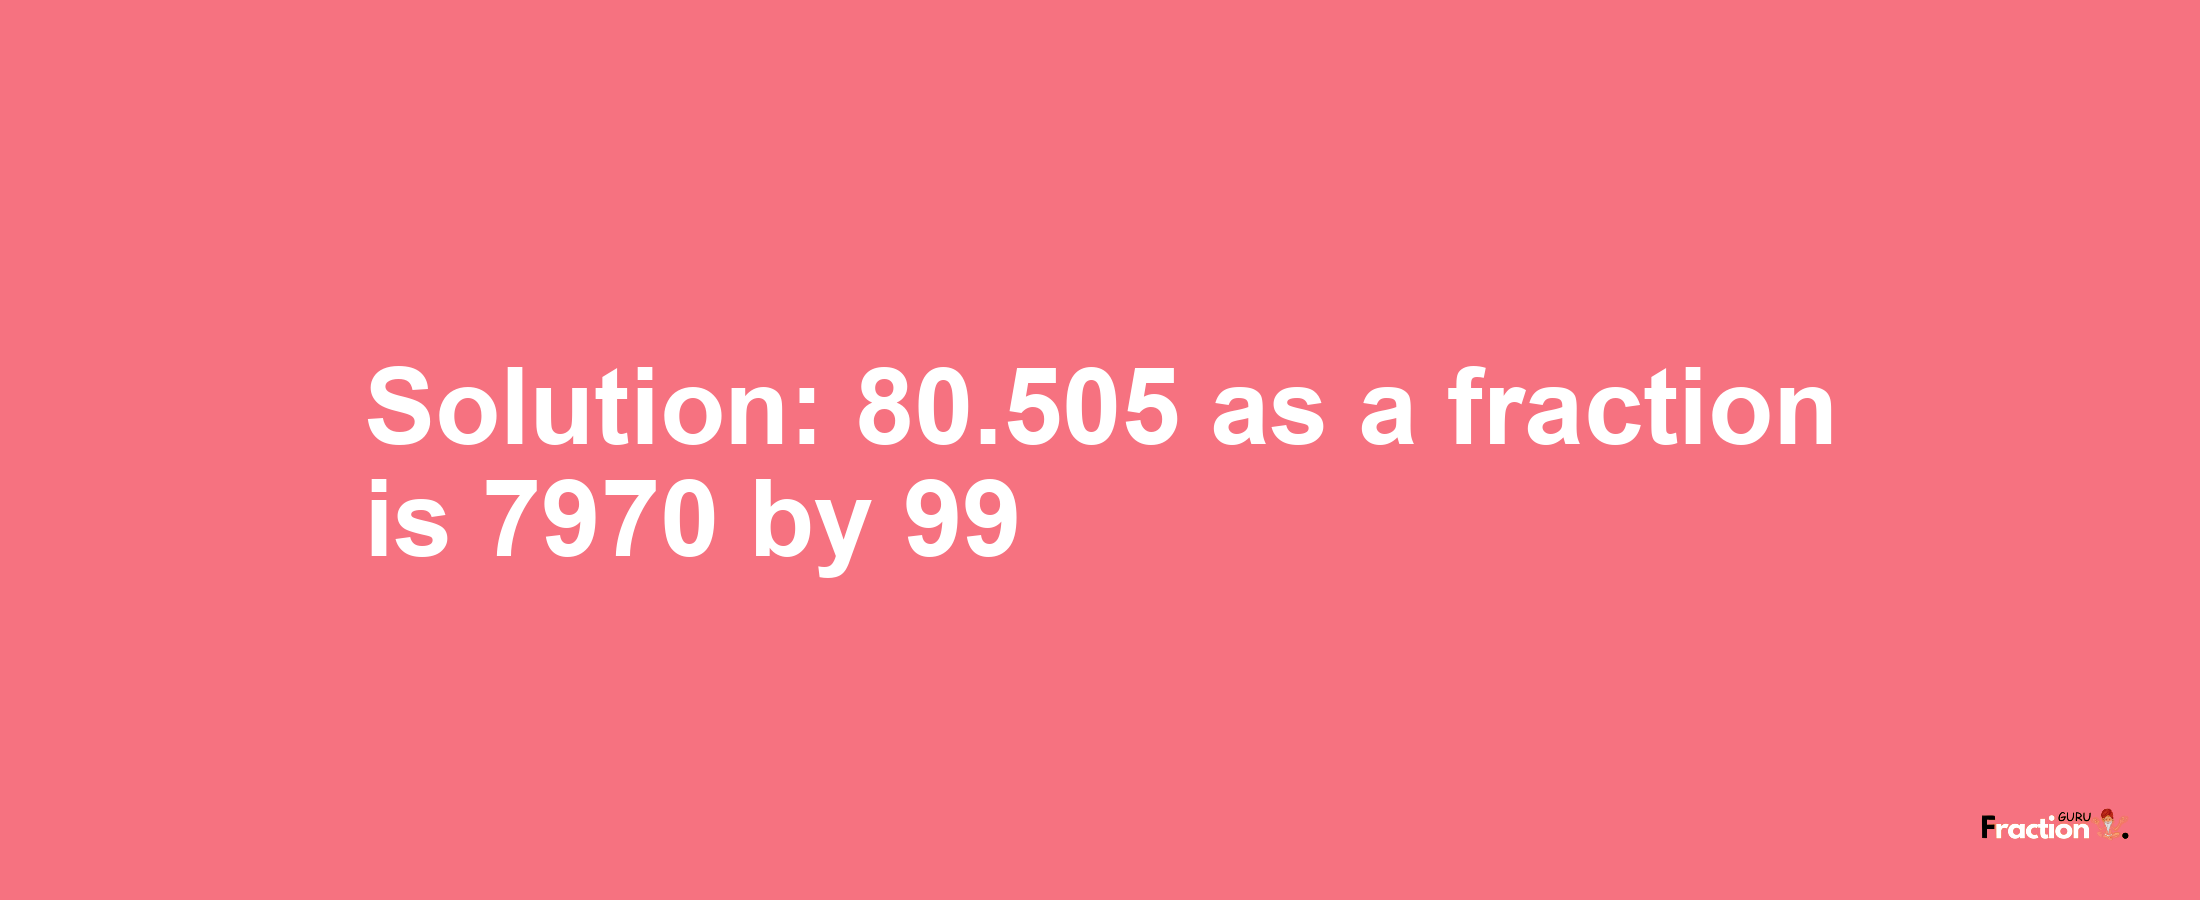 Solution:80.505 as a fraction is 7970/99